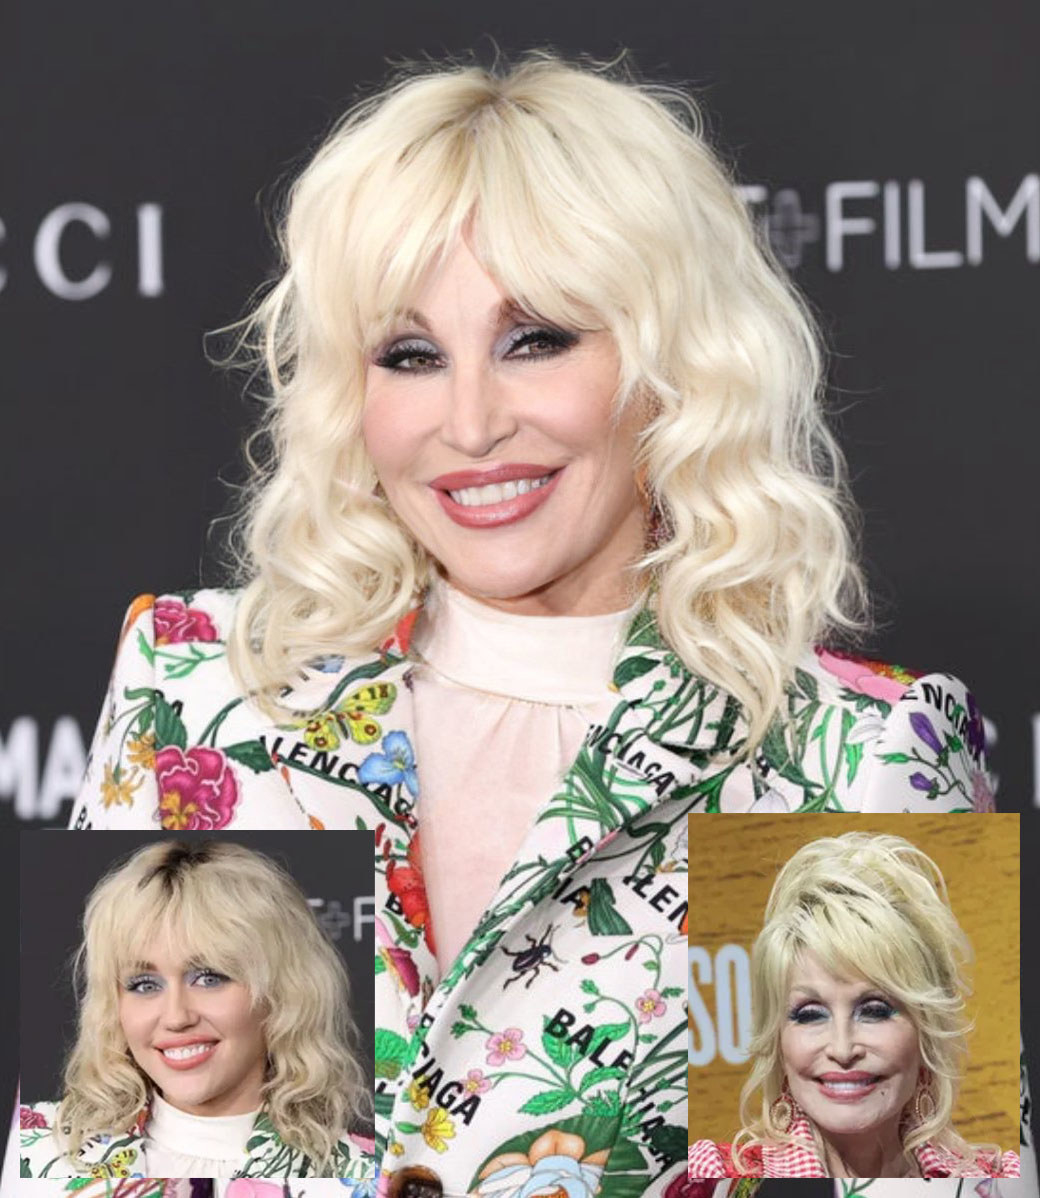 Dolly and Miley morphed together